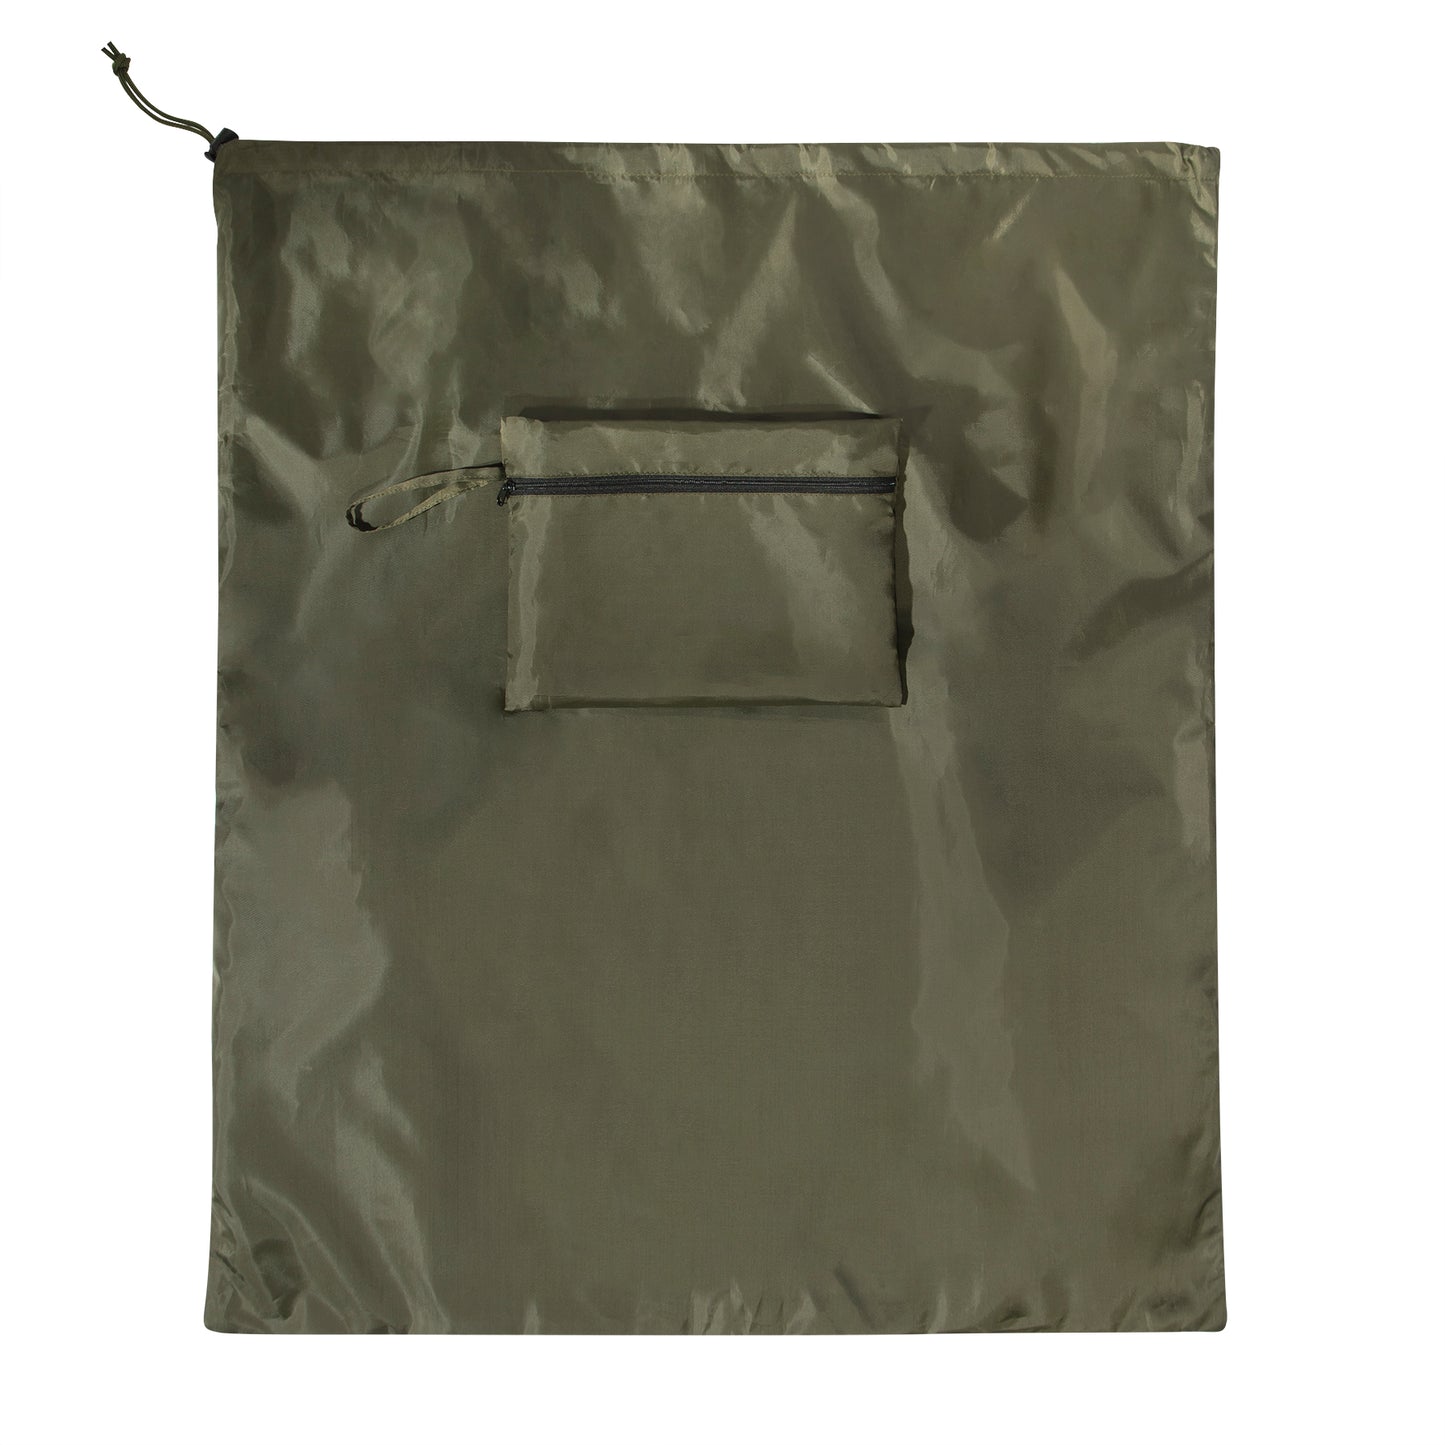 Rothco Packable Laundry Bag Backpack - Olive Drab